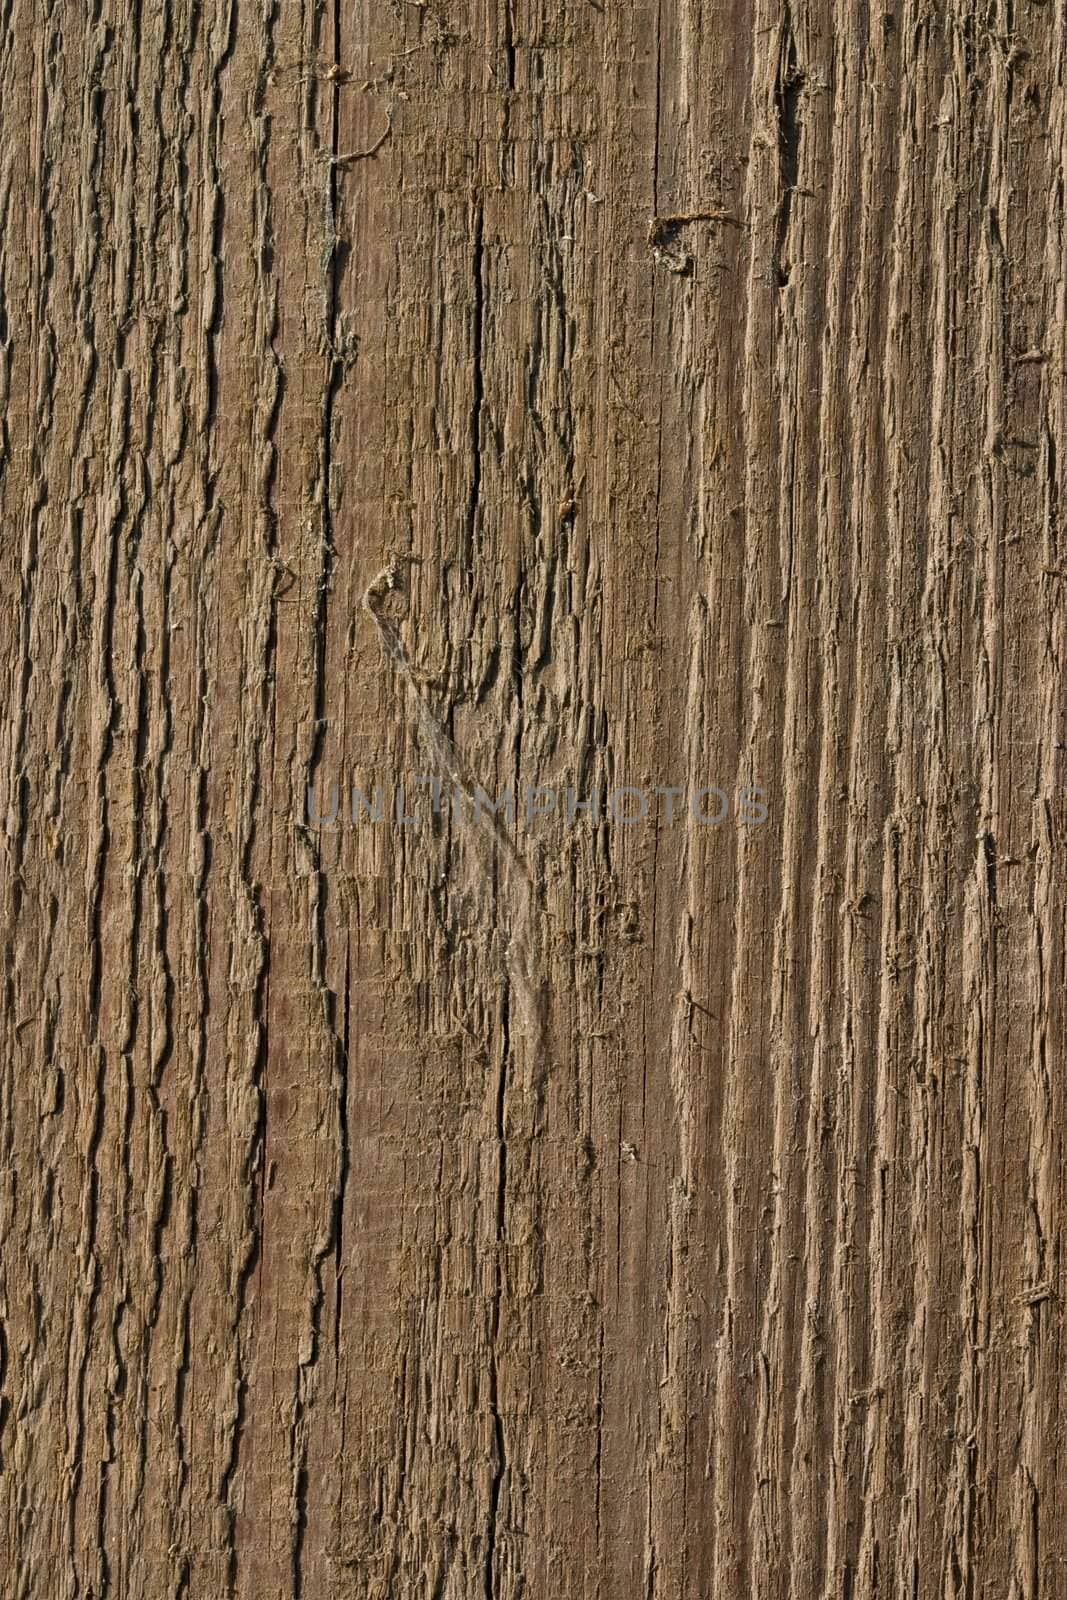 texture series: macro picture of old wooden board